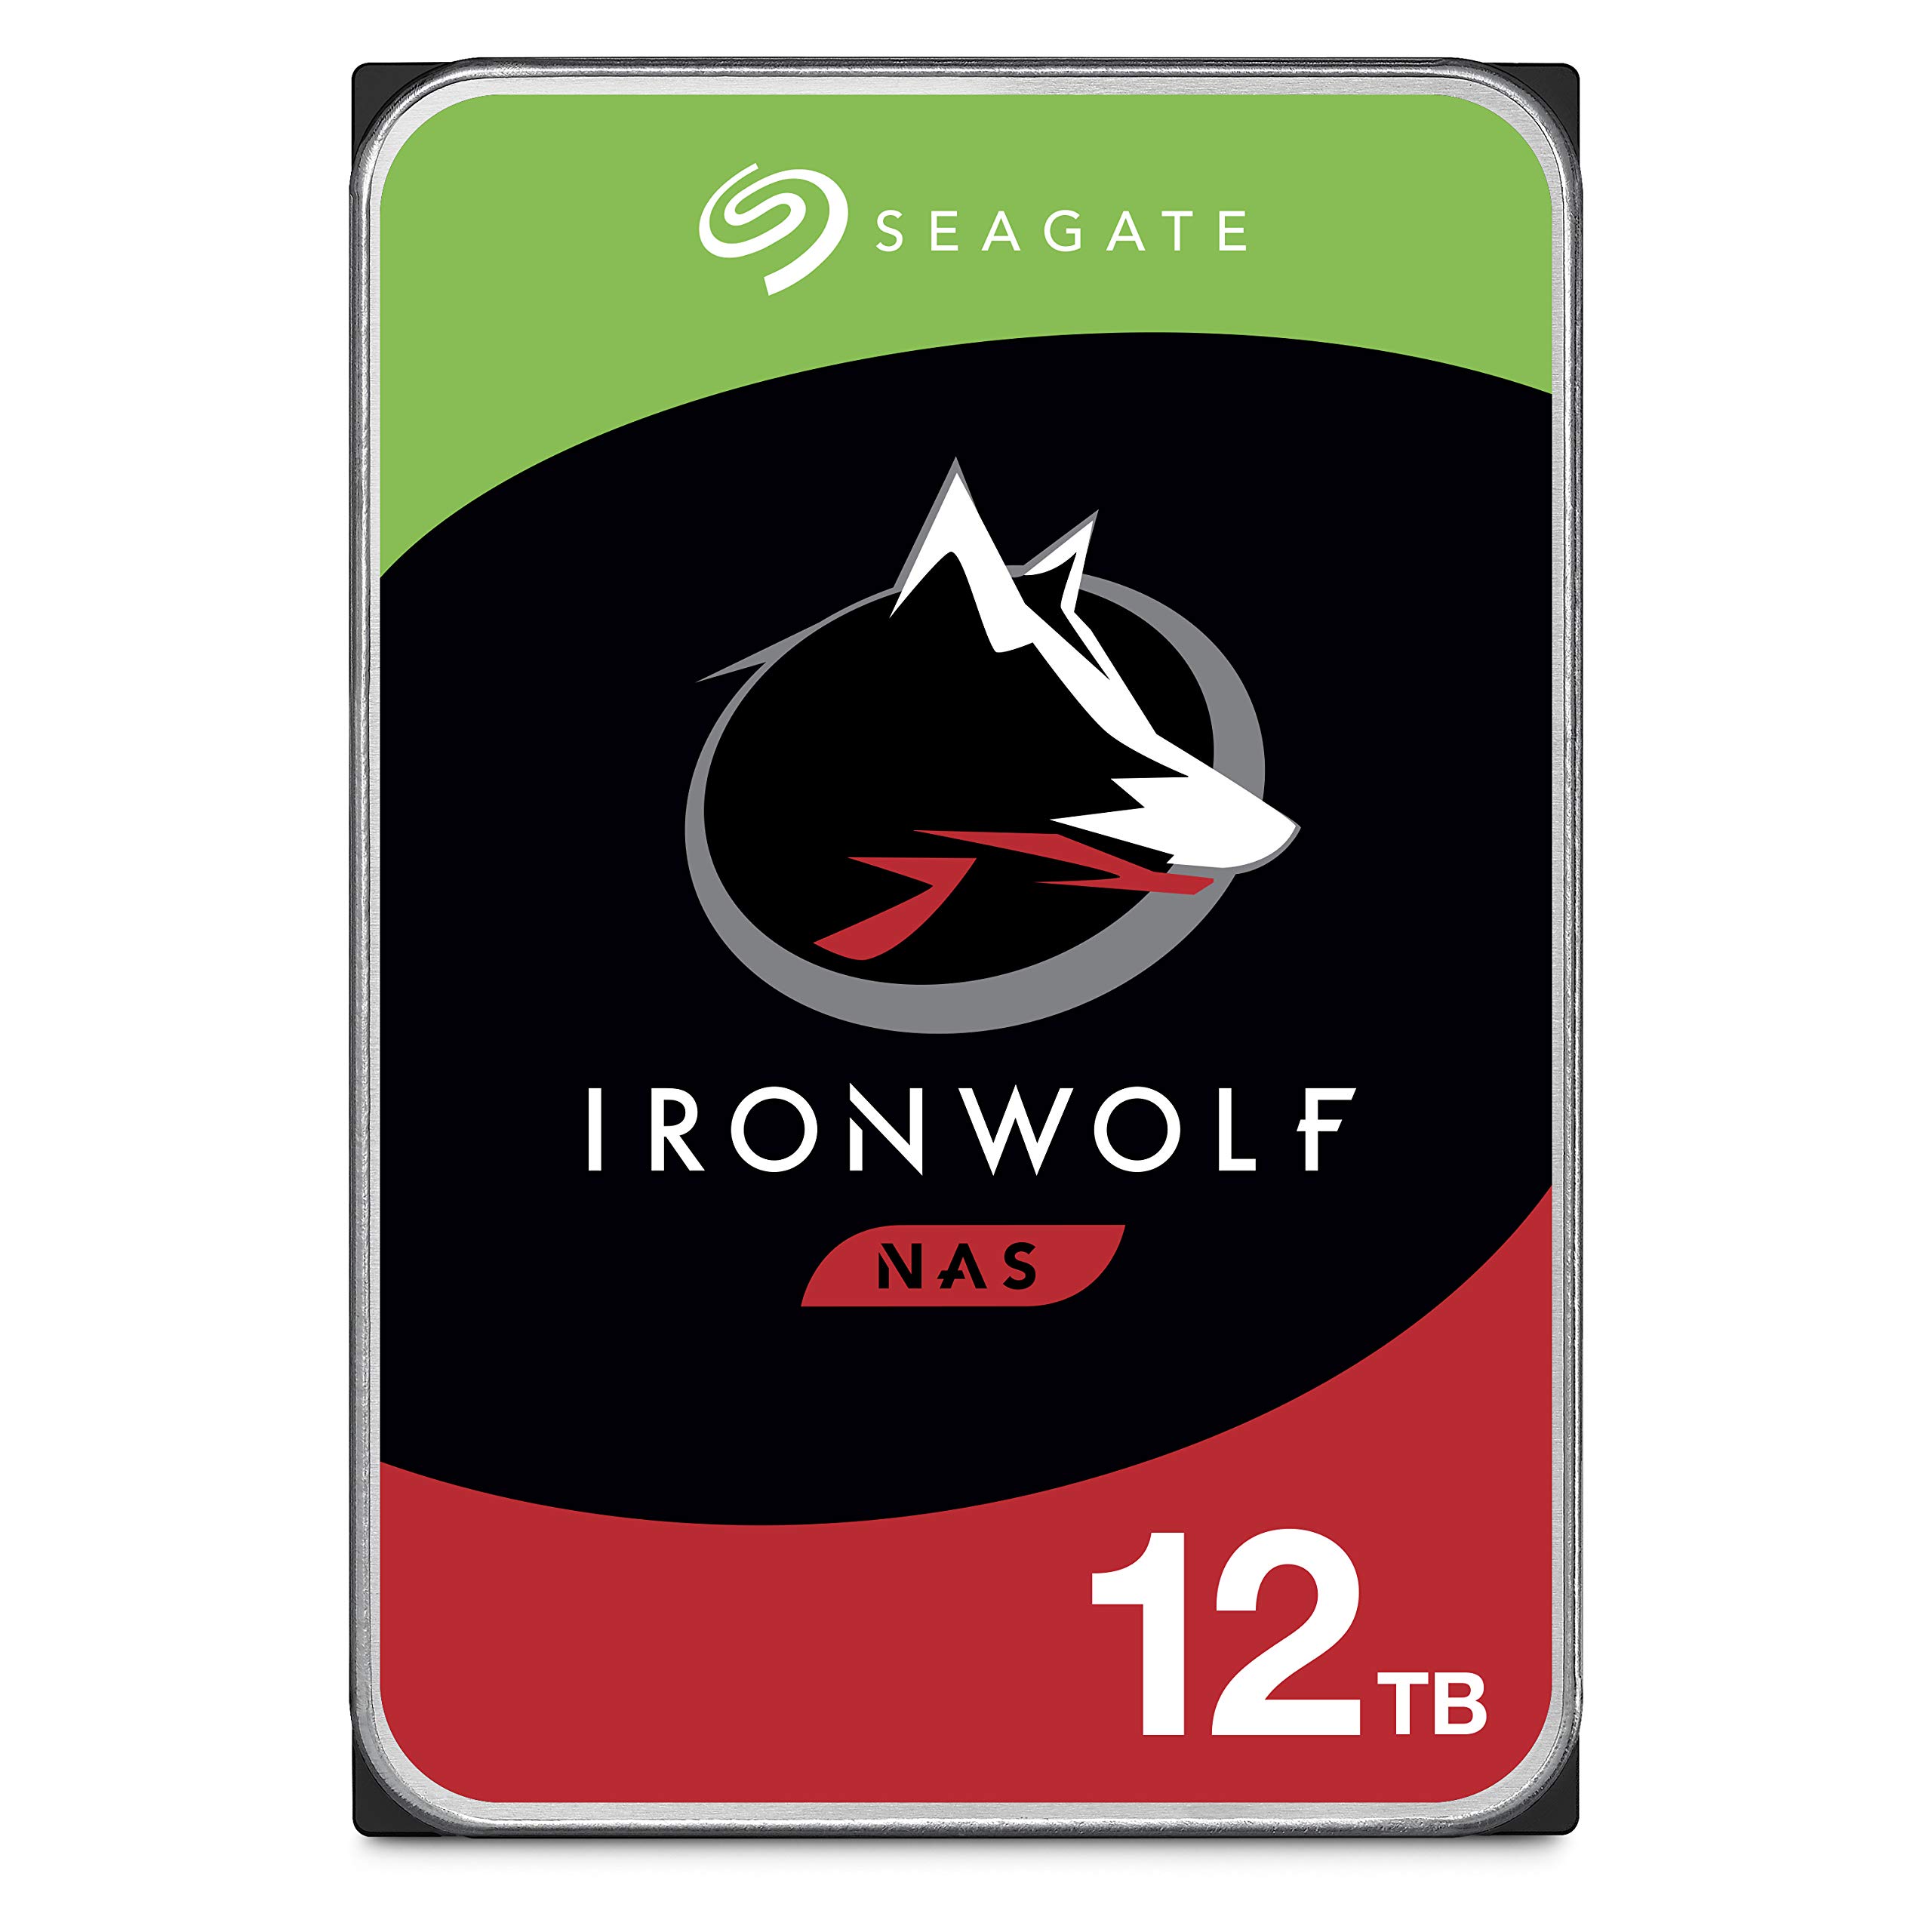 Seagate IronWolf 12TB NAS Internal Hard Drive HDD 3.5 Inch SATA 6Gbs 7200 RPM 256MB Cache for RAID Network Attached Stor